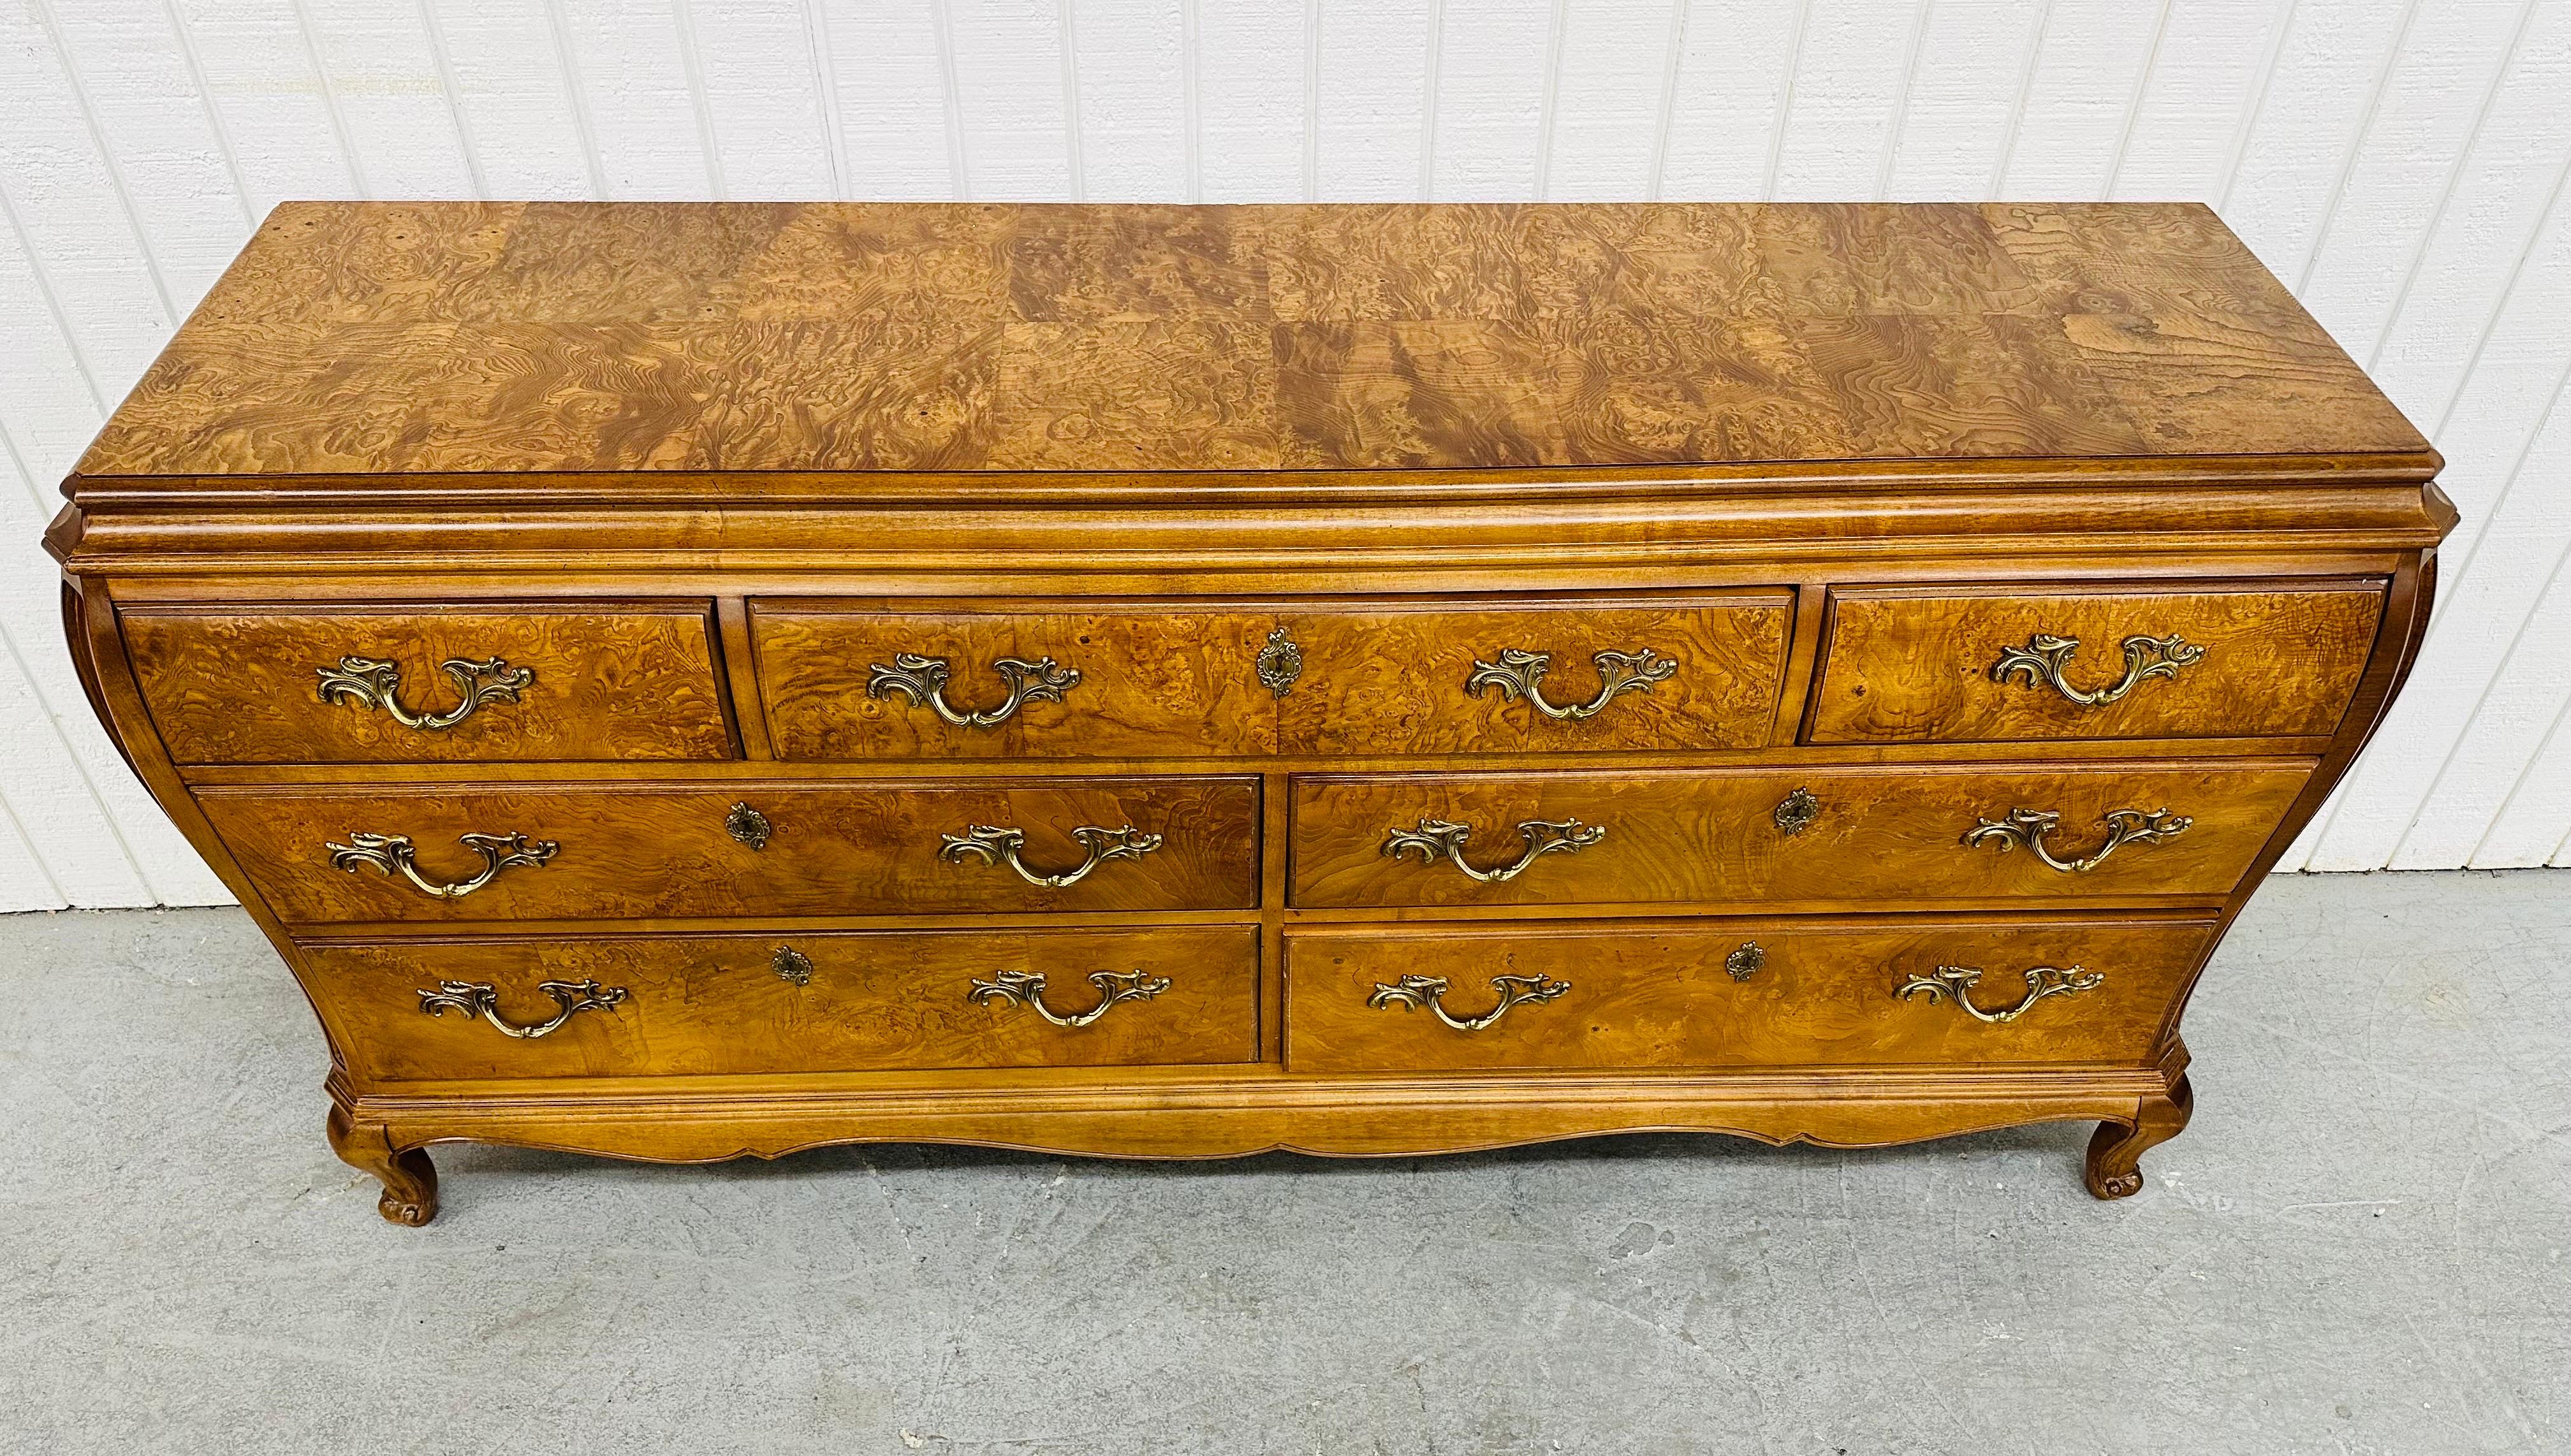 Vintage Henredon French Provincial Burled Wood Dresser In Good Condition For Sale In Clarksboro, NJ